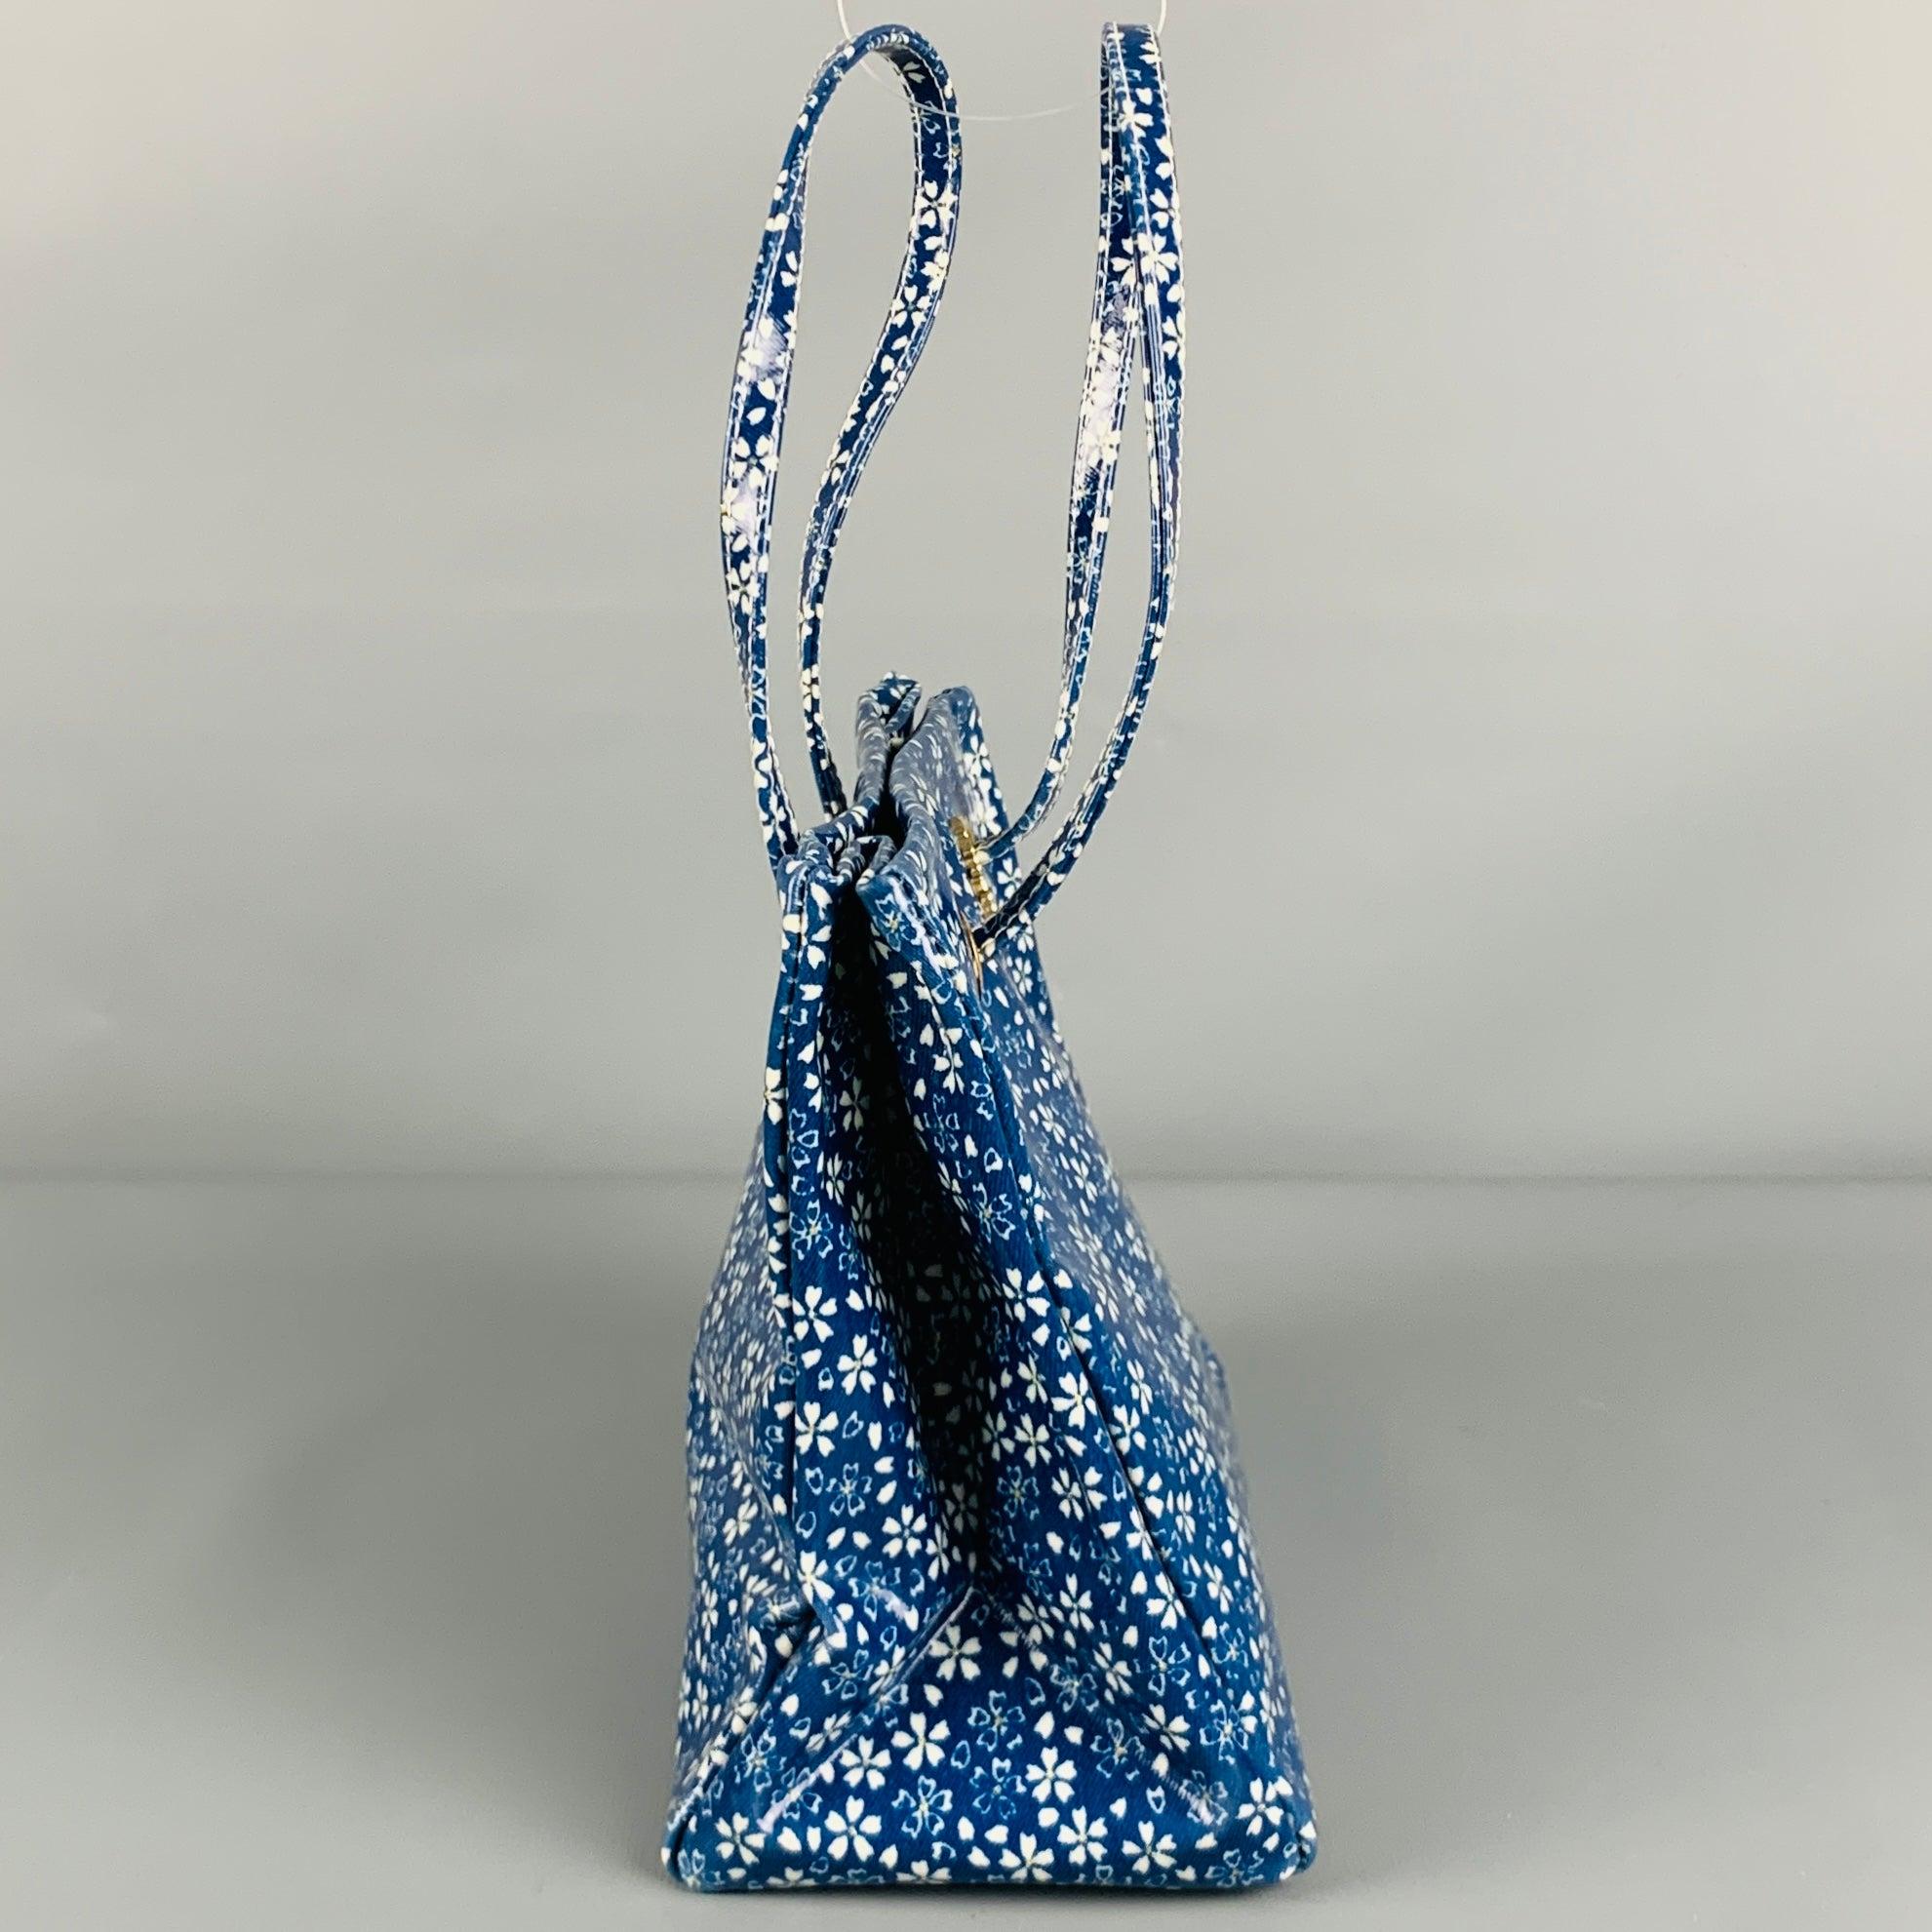 ROBERTO CAVALLI handbag in a blue and white coated canvas featuring mini tote style, floral pattern, brand monogram, and top handles. Made in Italy.Excellent Pre-Owned Condition. 

Measurements: 
  Length: 8.5 inches Width: 4.25 inches Height: 
7.5